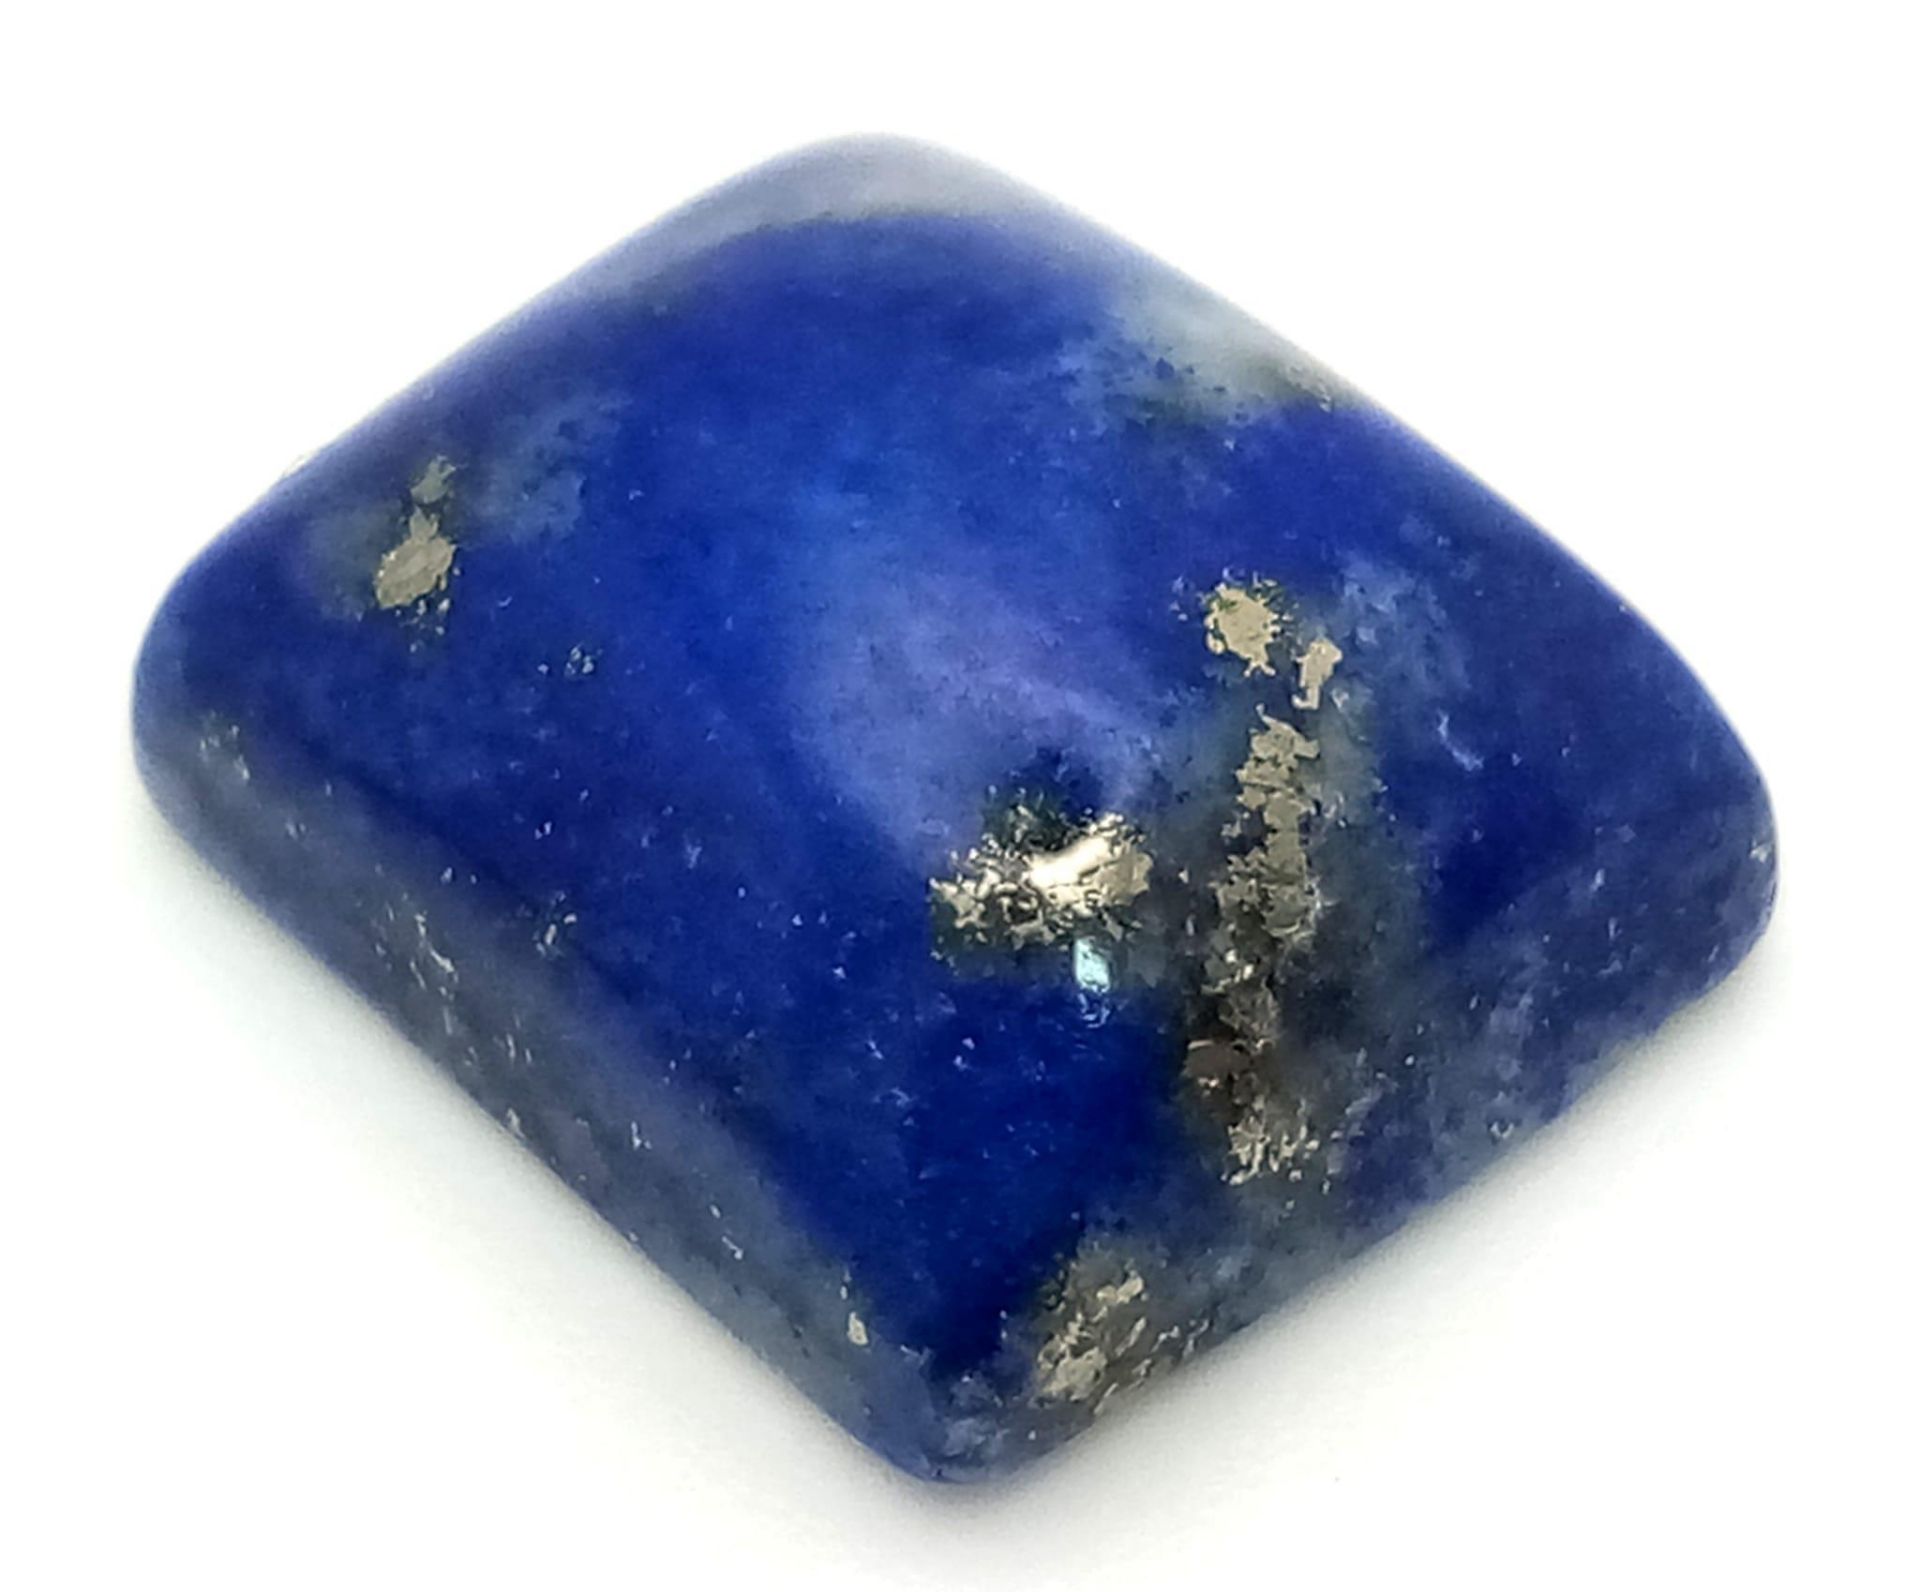 7.20ct of Square Cabochon Natural Lapis Lazuli. GLI Certification included. - Image 2 of 4